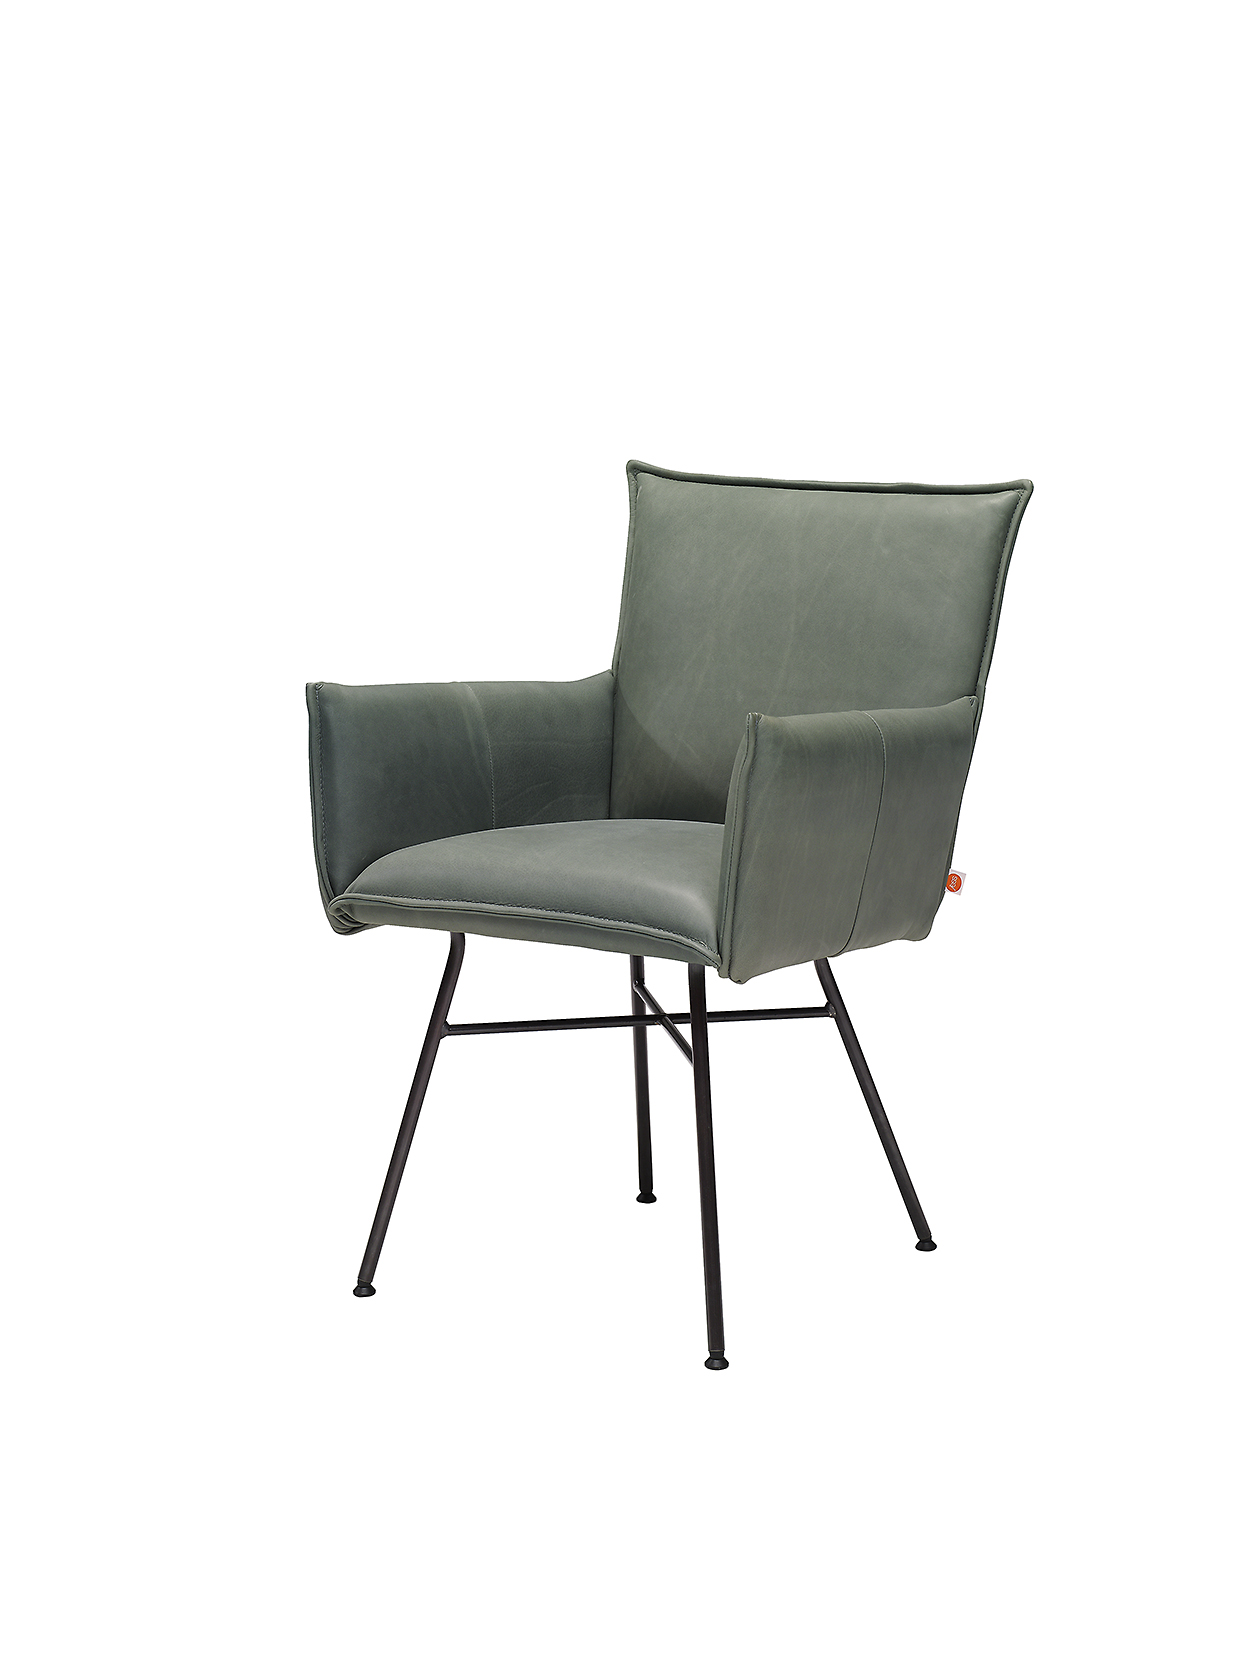 Sanne Chair With Arm Sadie Olive Pers LR ZS 8720153744577